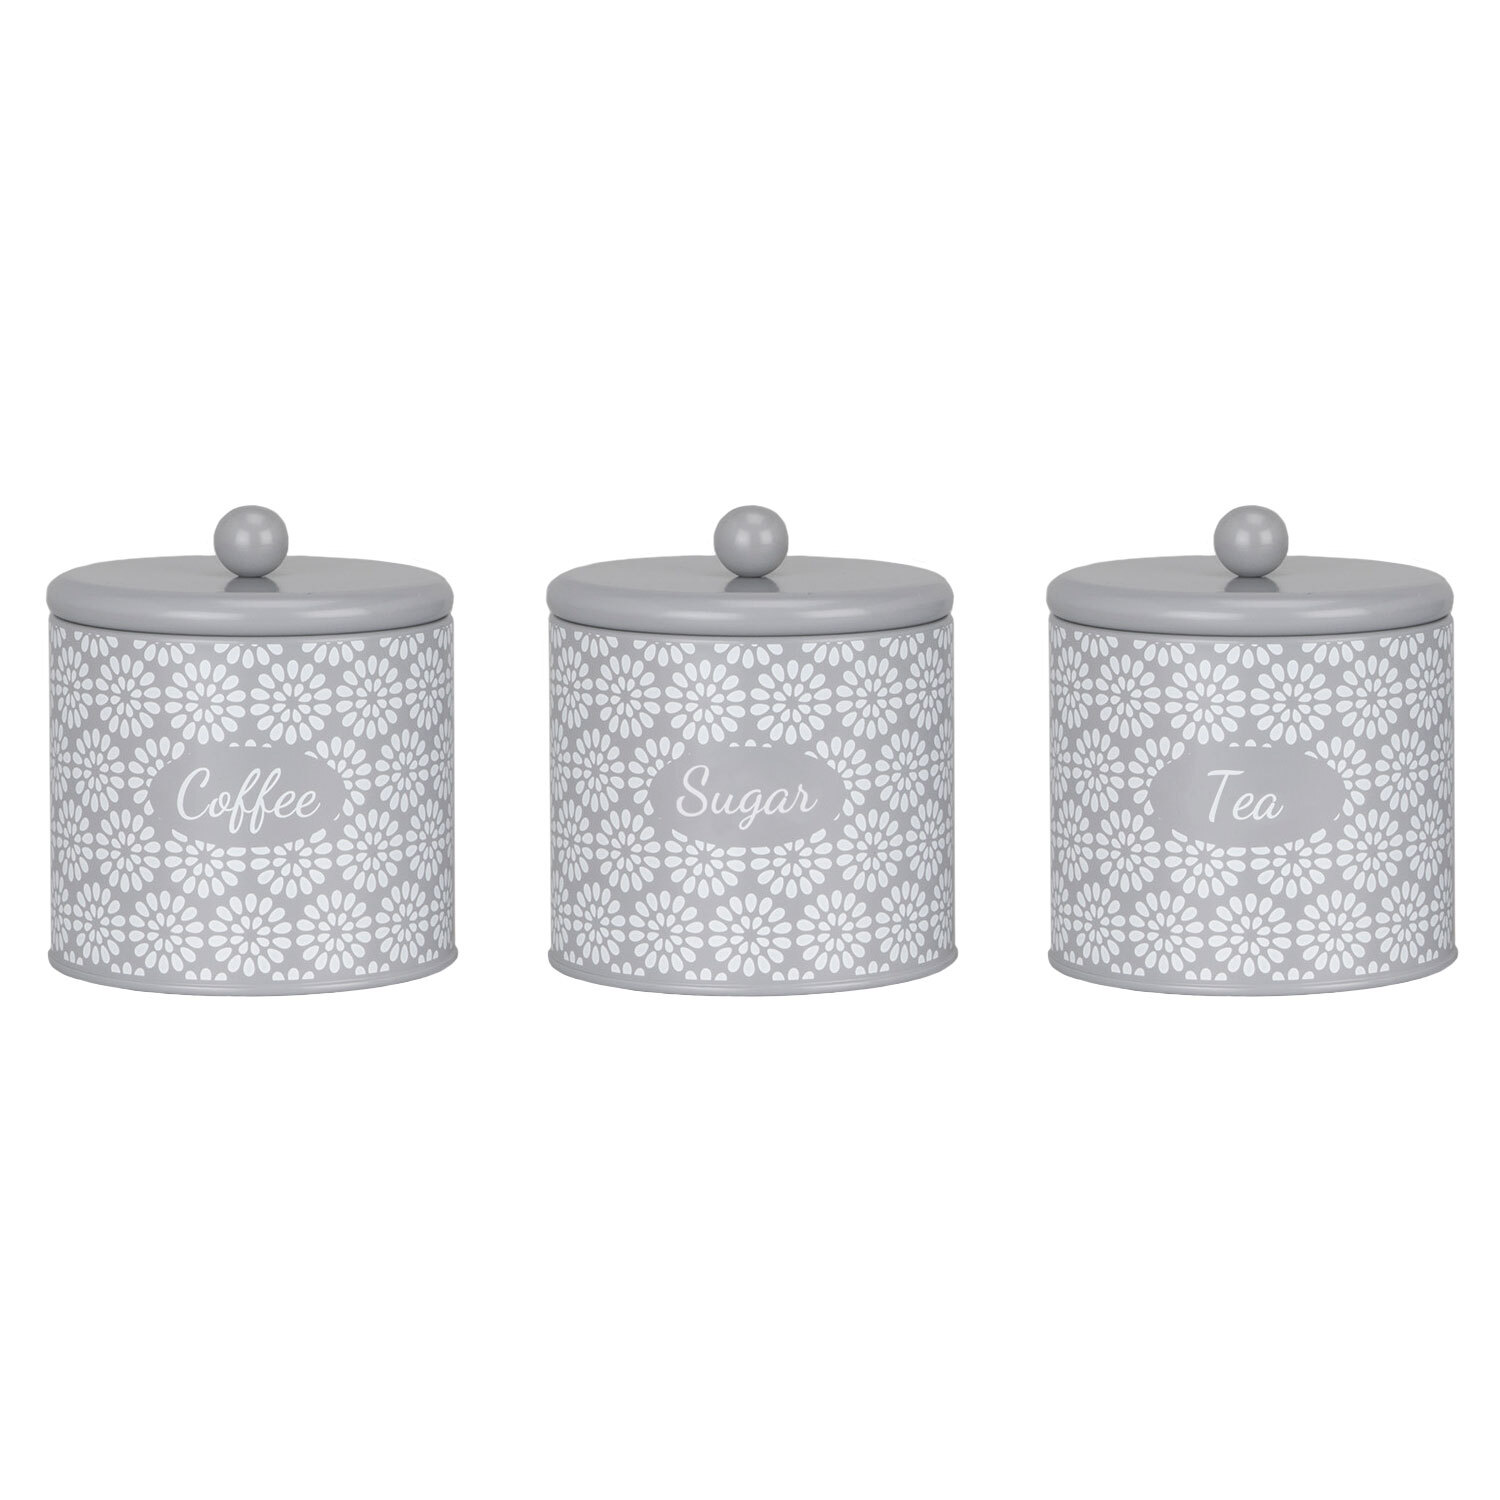 Geometric Blossom Canisters 3 Pack Image